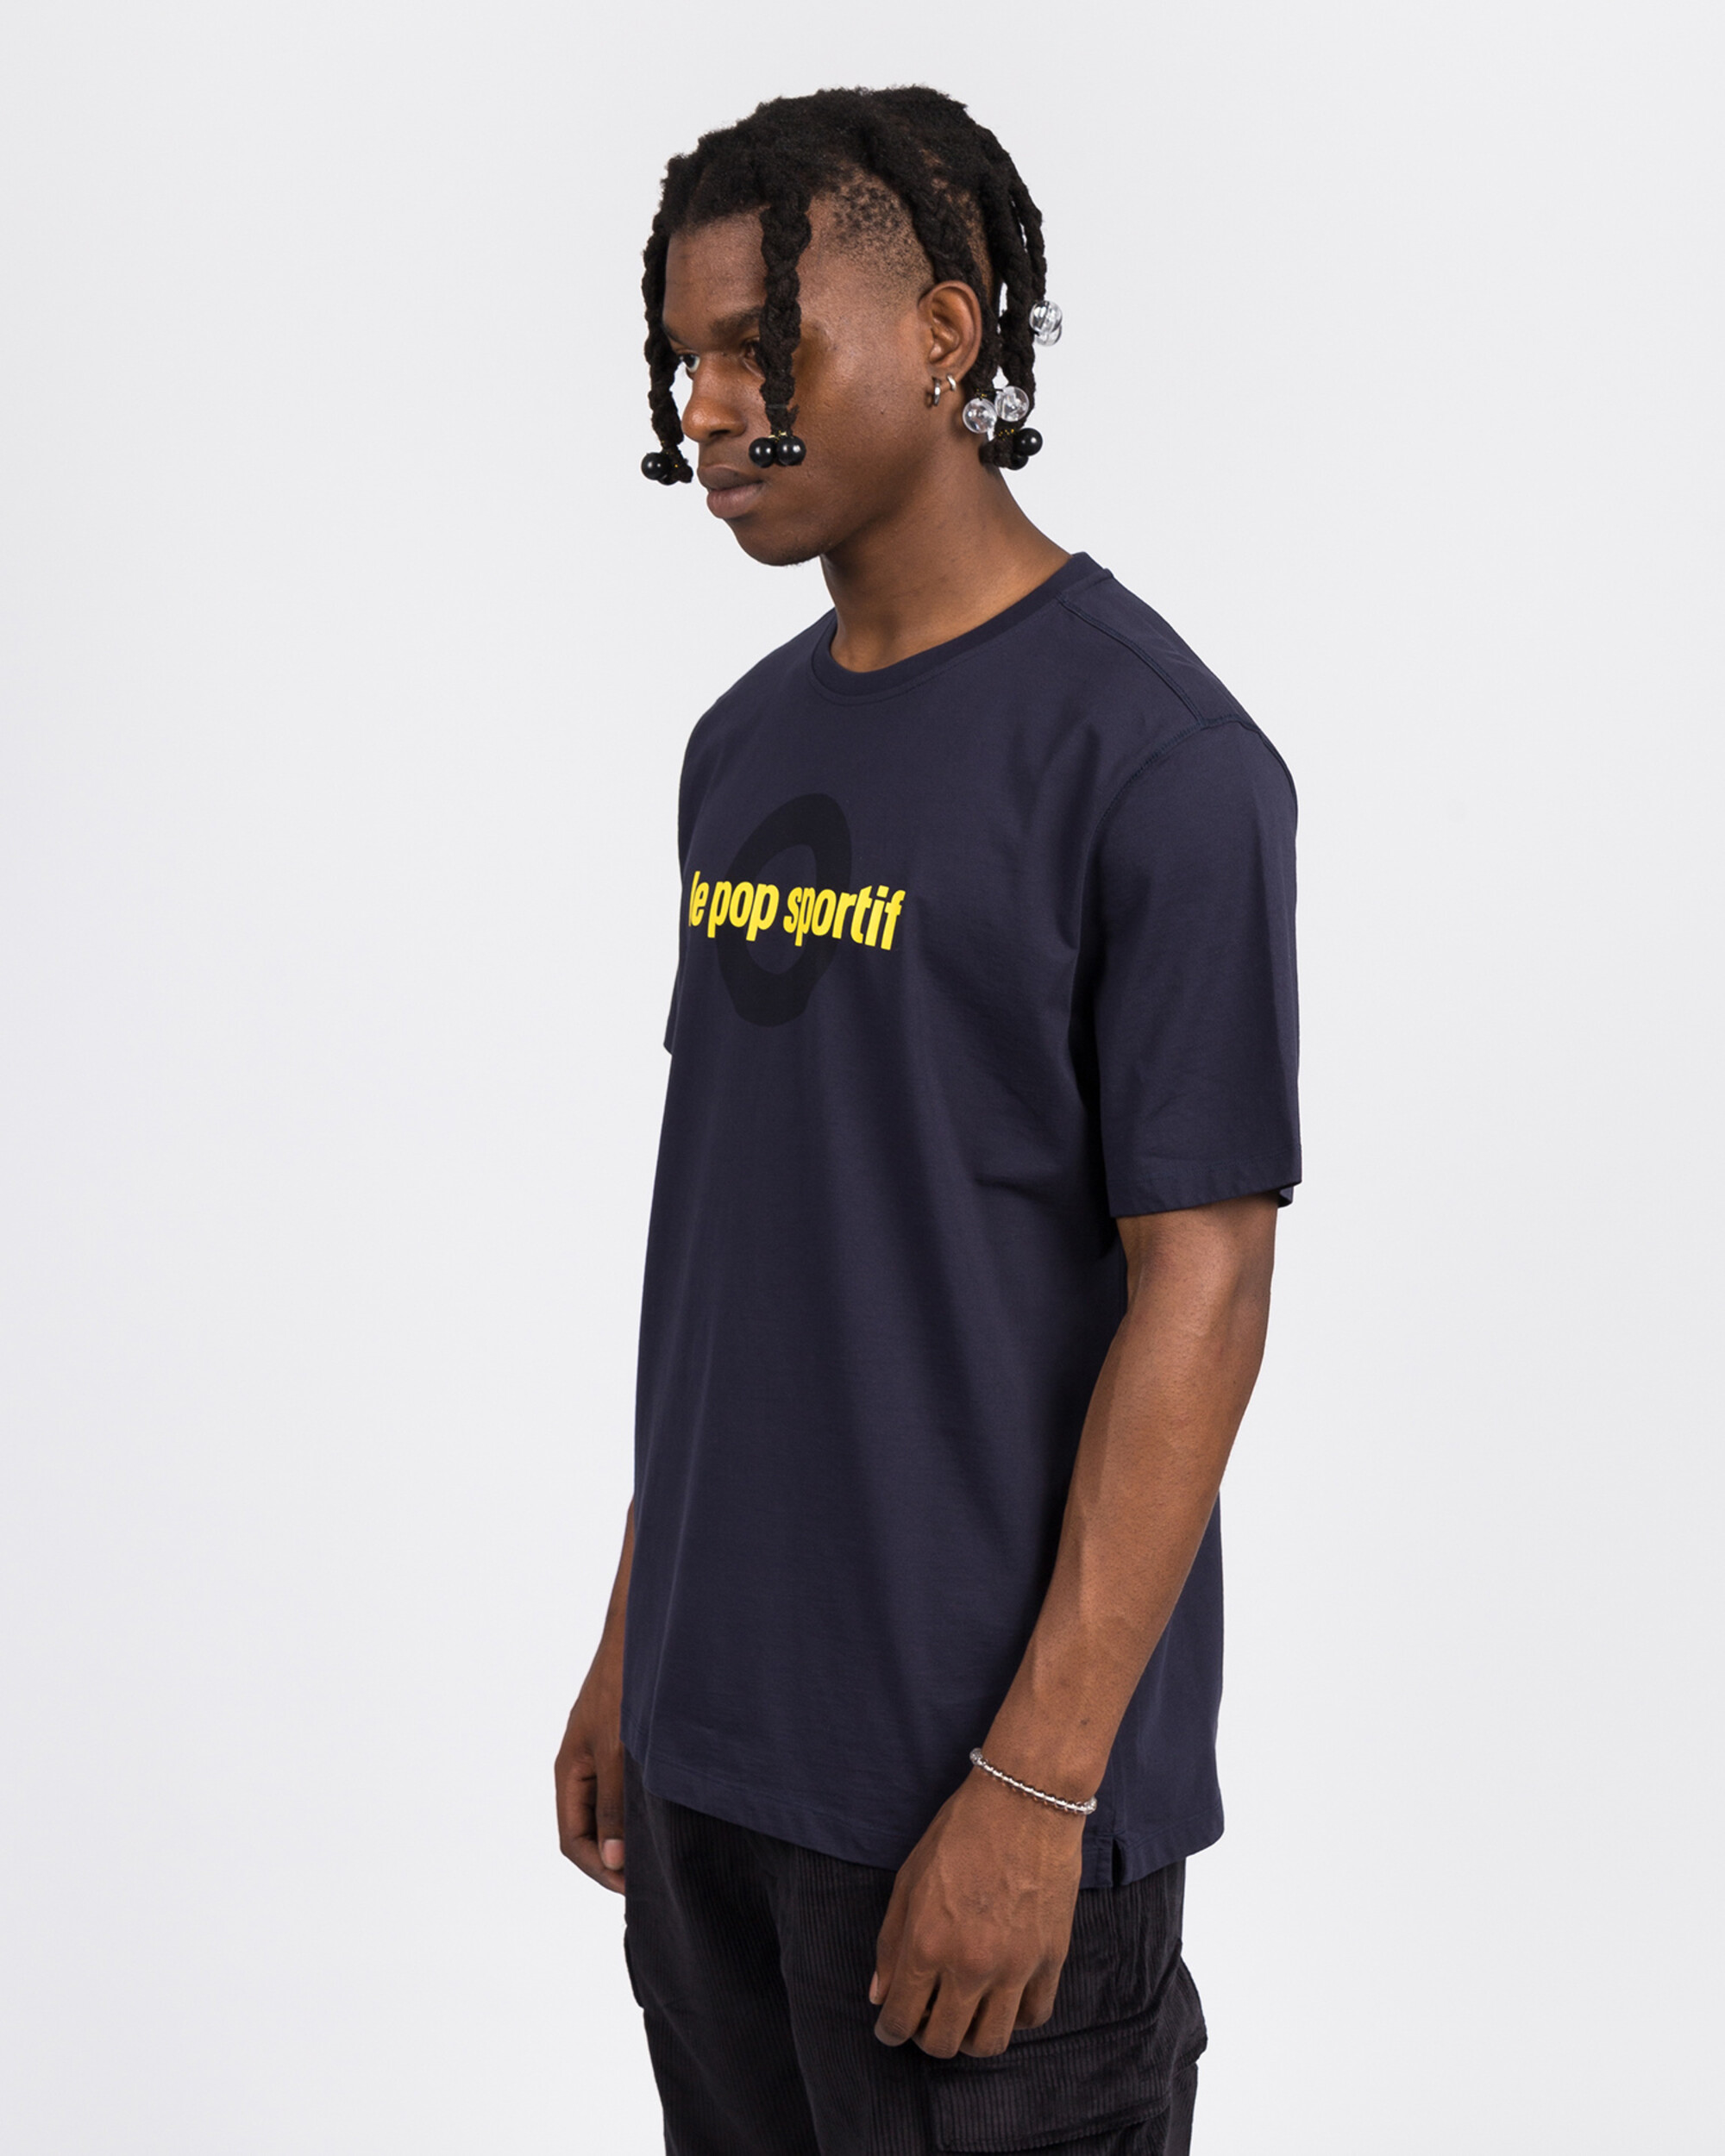 Pop Trading Co le t-shirt navy